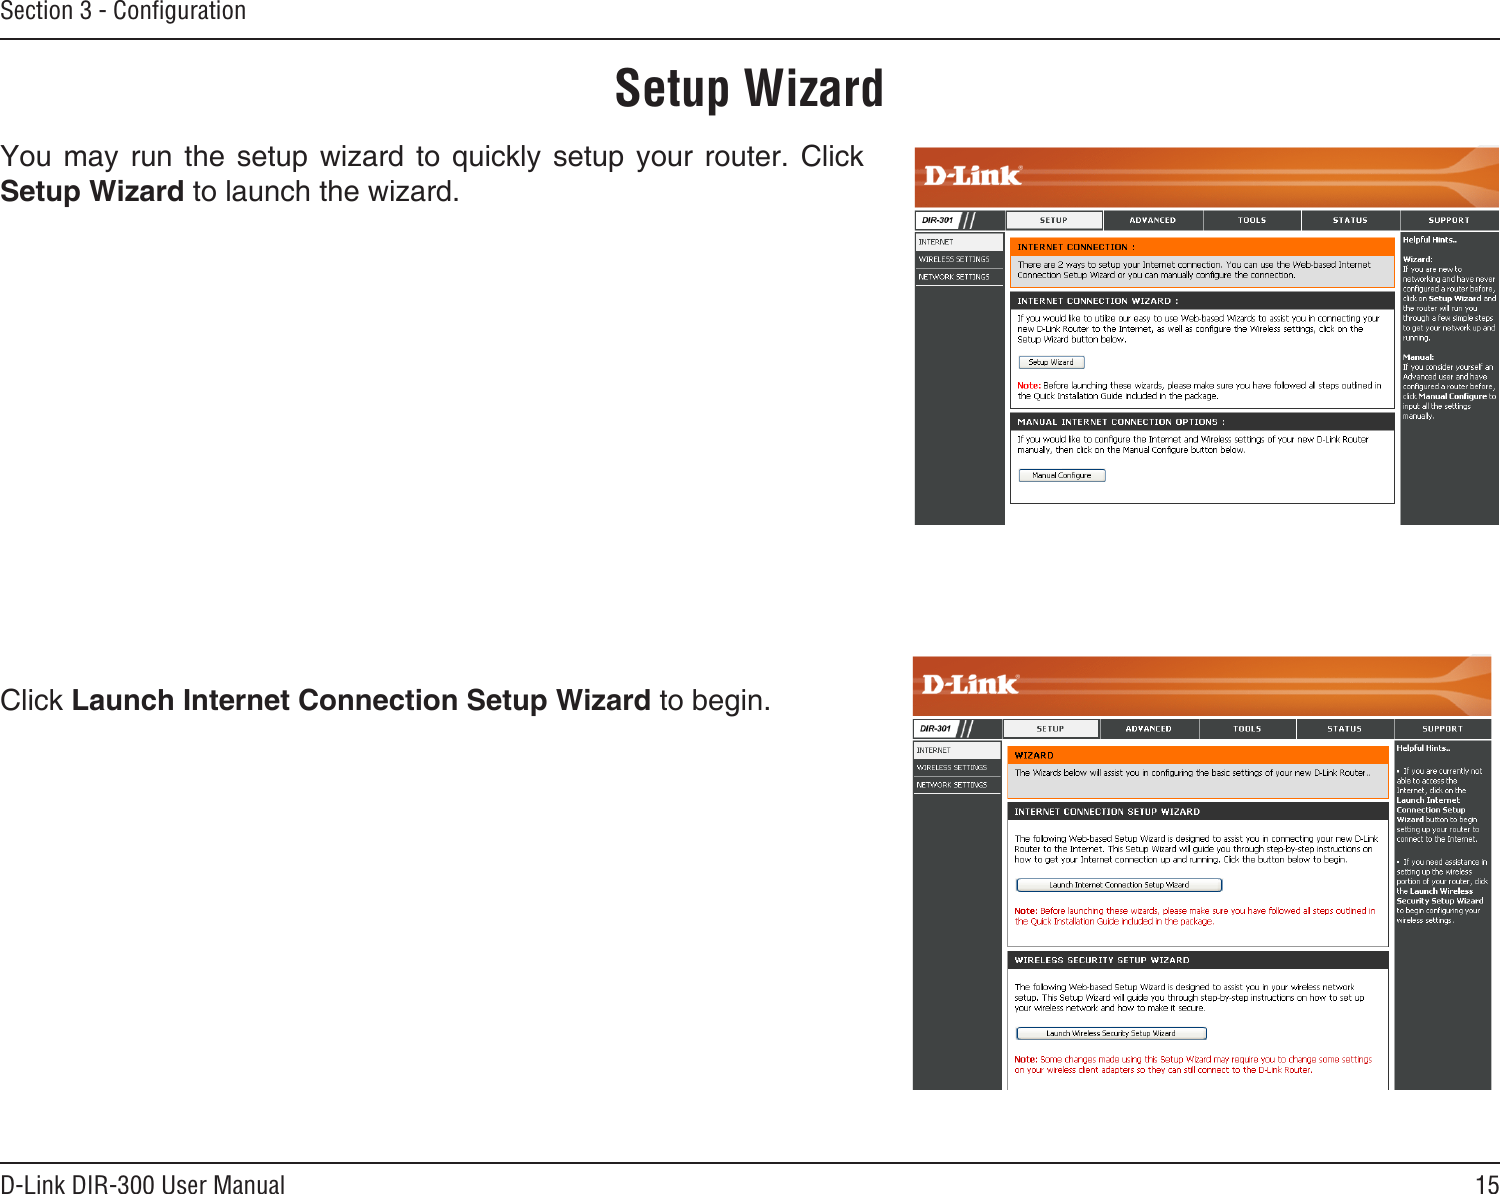 15D-Link DIR-300 User ManualSection 3 - ConﬁgurationSetup WizardYou  may  run  the  setup  wizard  to  quickly  setup  your  router.  Click Setup Wizard to launch the wizard.Click Launch Internet Connection Setup Wizard to begin.